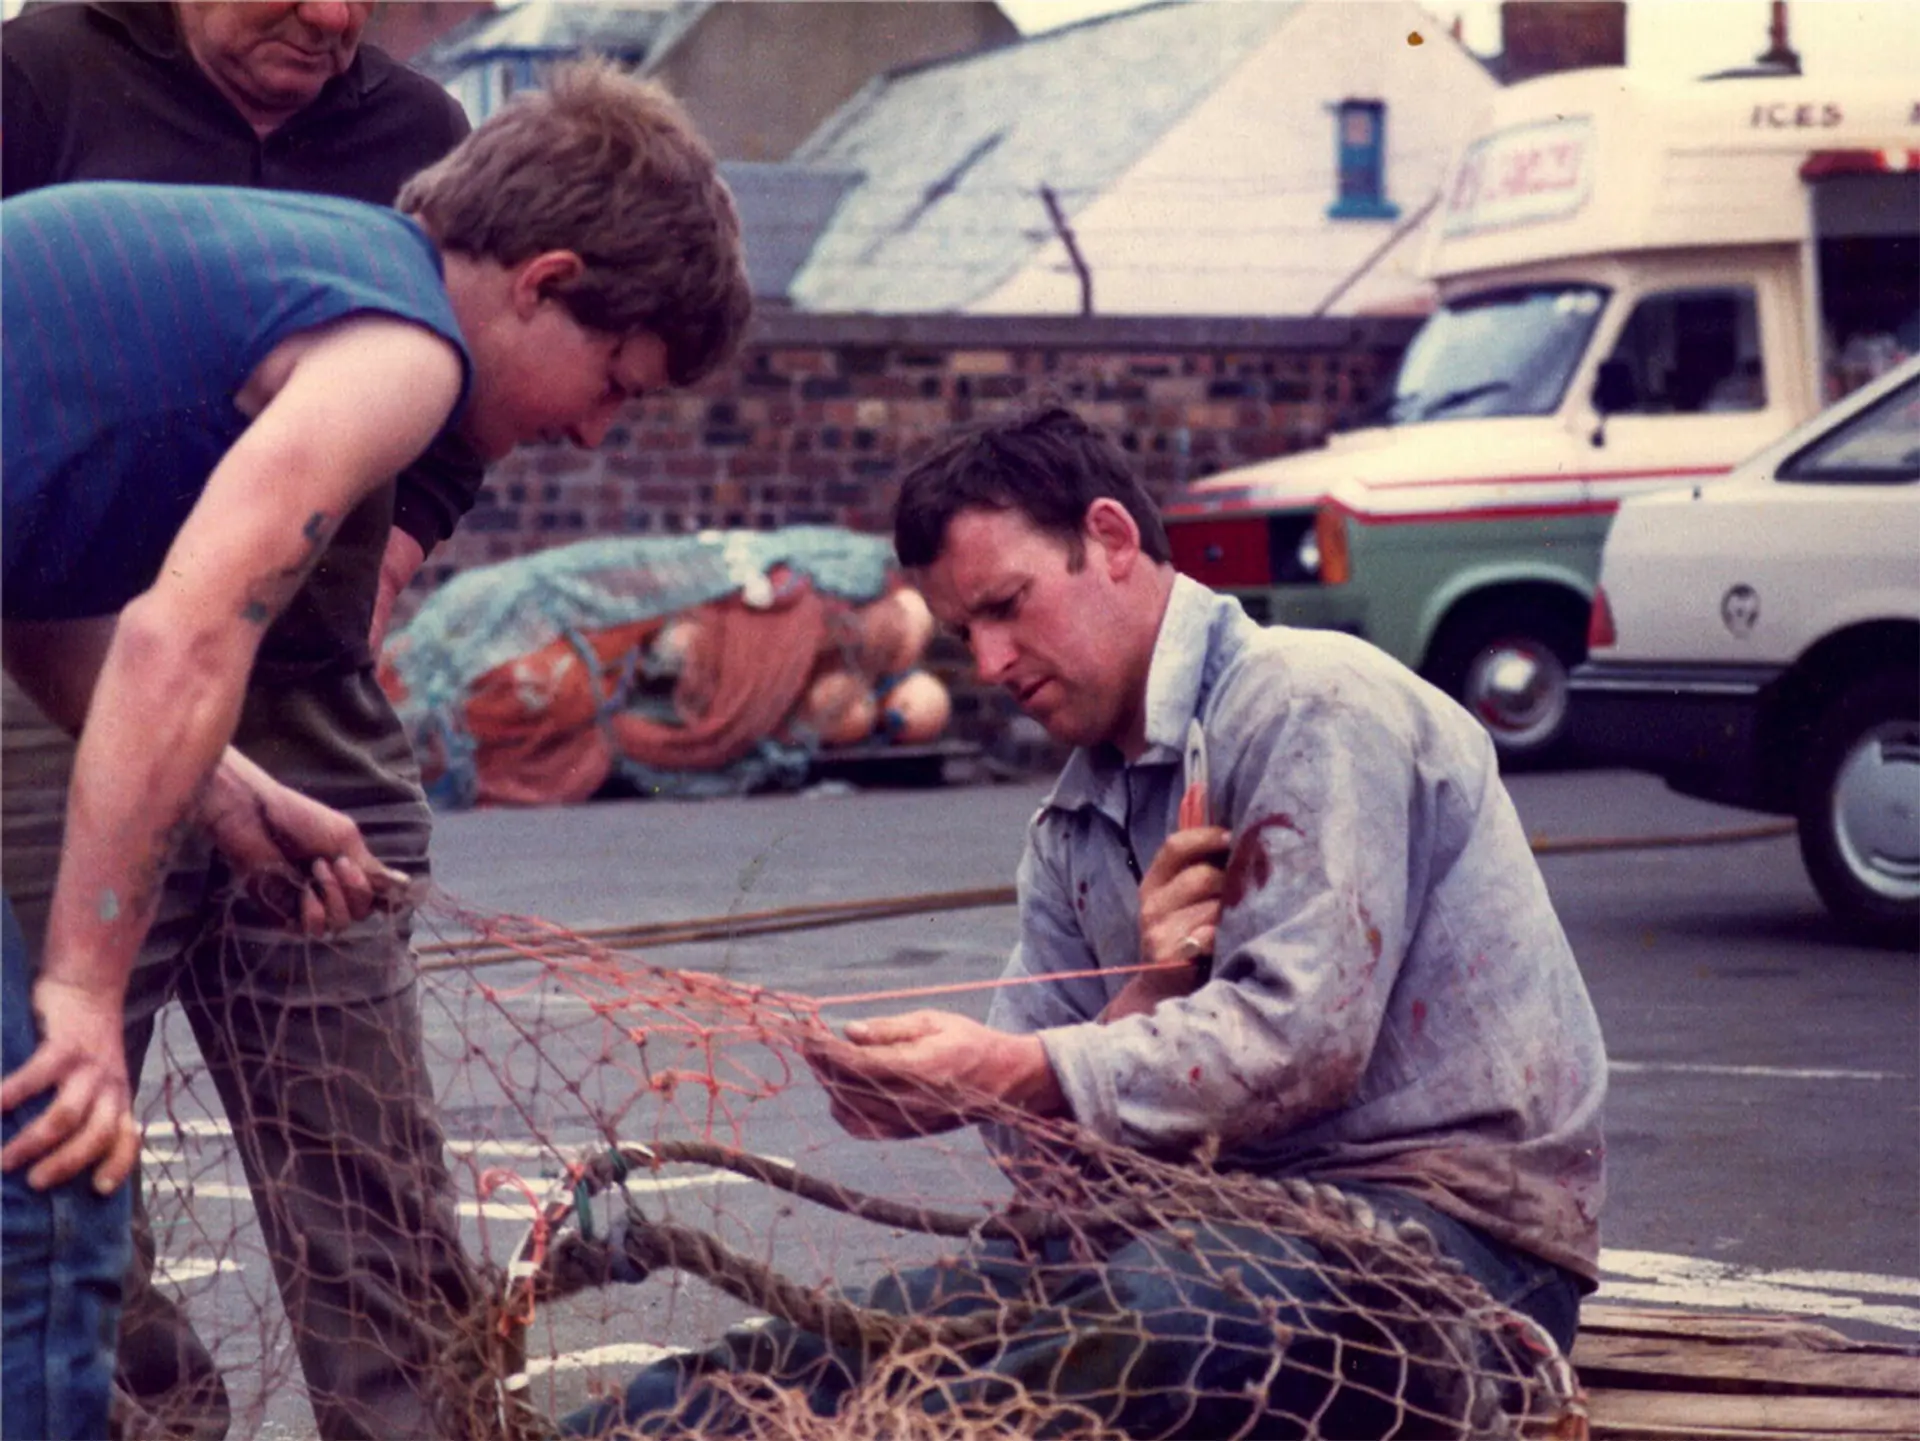 An image from the past, three men are repairing a fishing net in a carpark. 